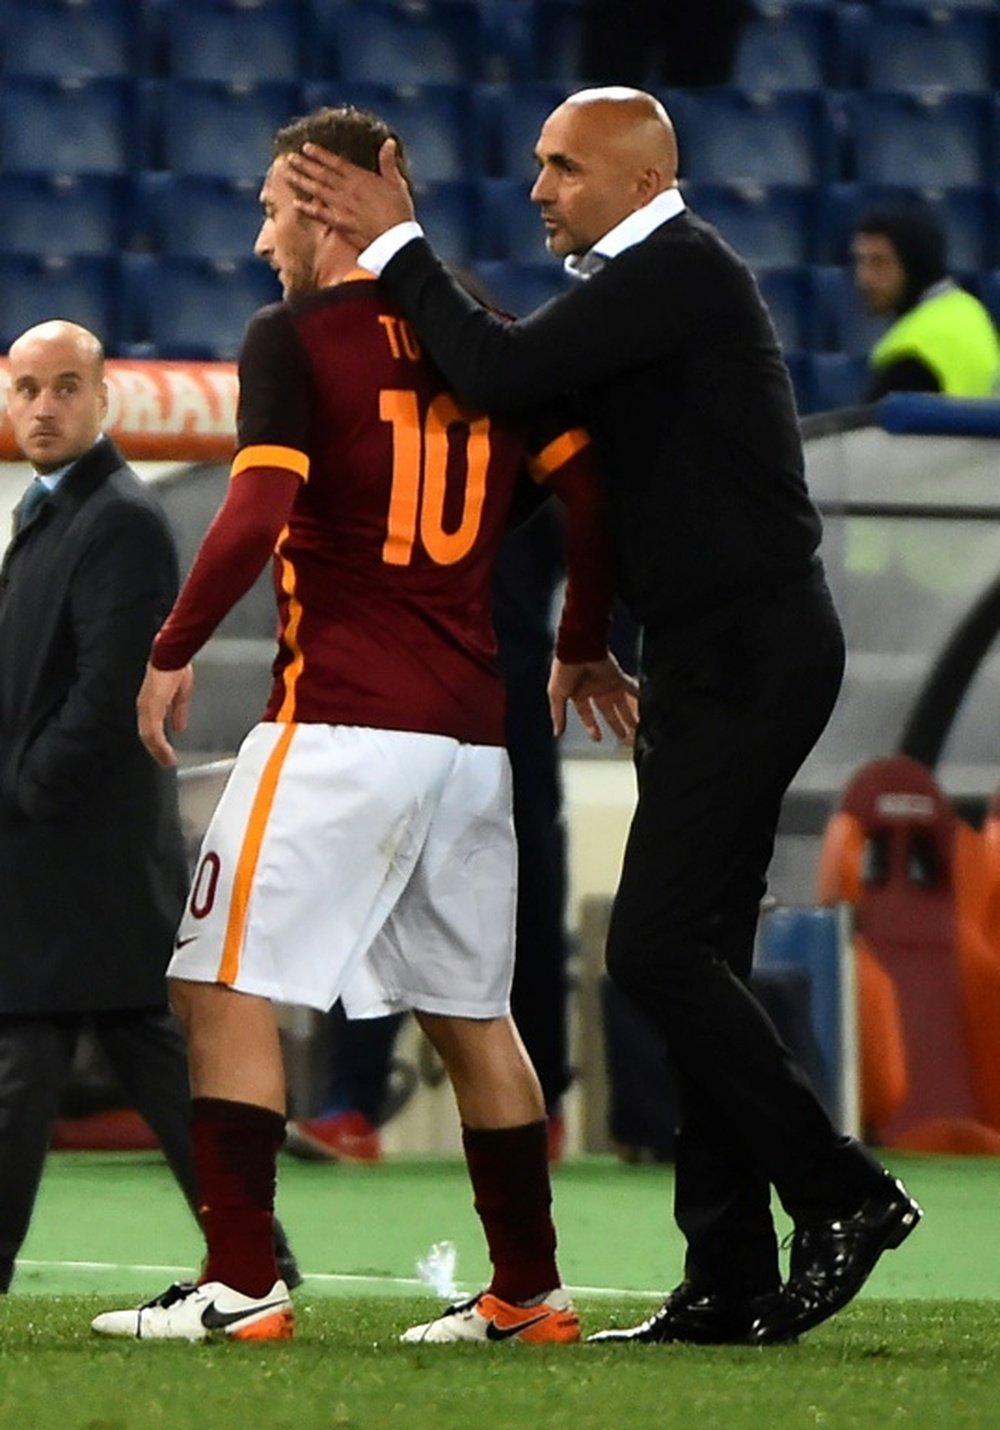 Spalletti to mourn Totti's shirt